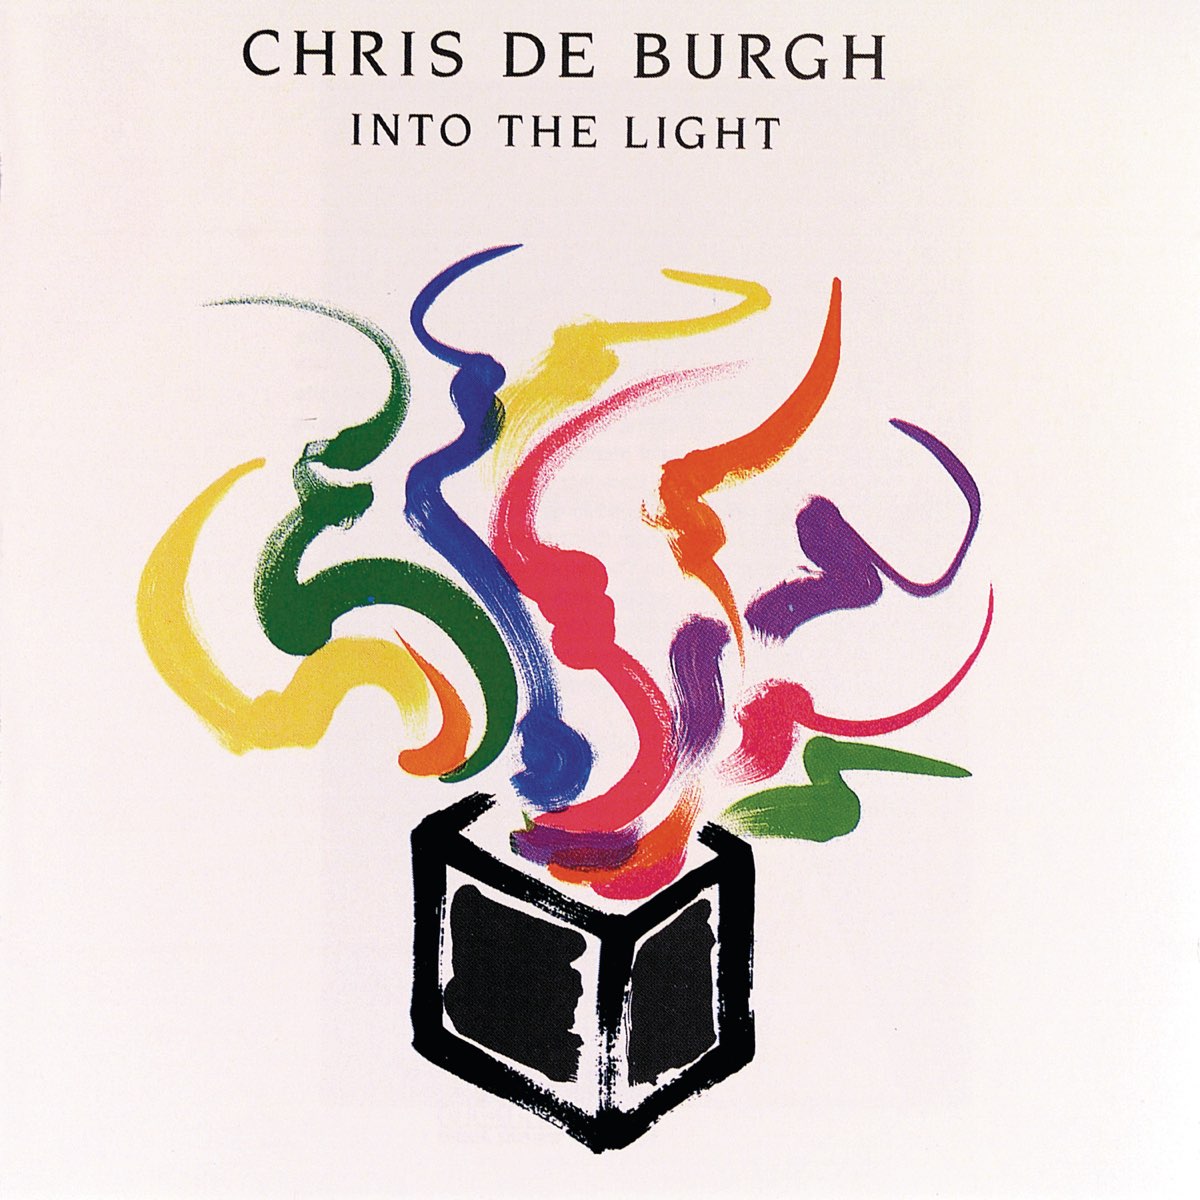 audio review : The Lady In Red ( song ) ... Chris De Burgh